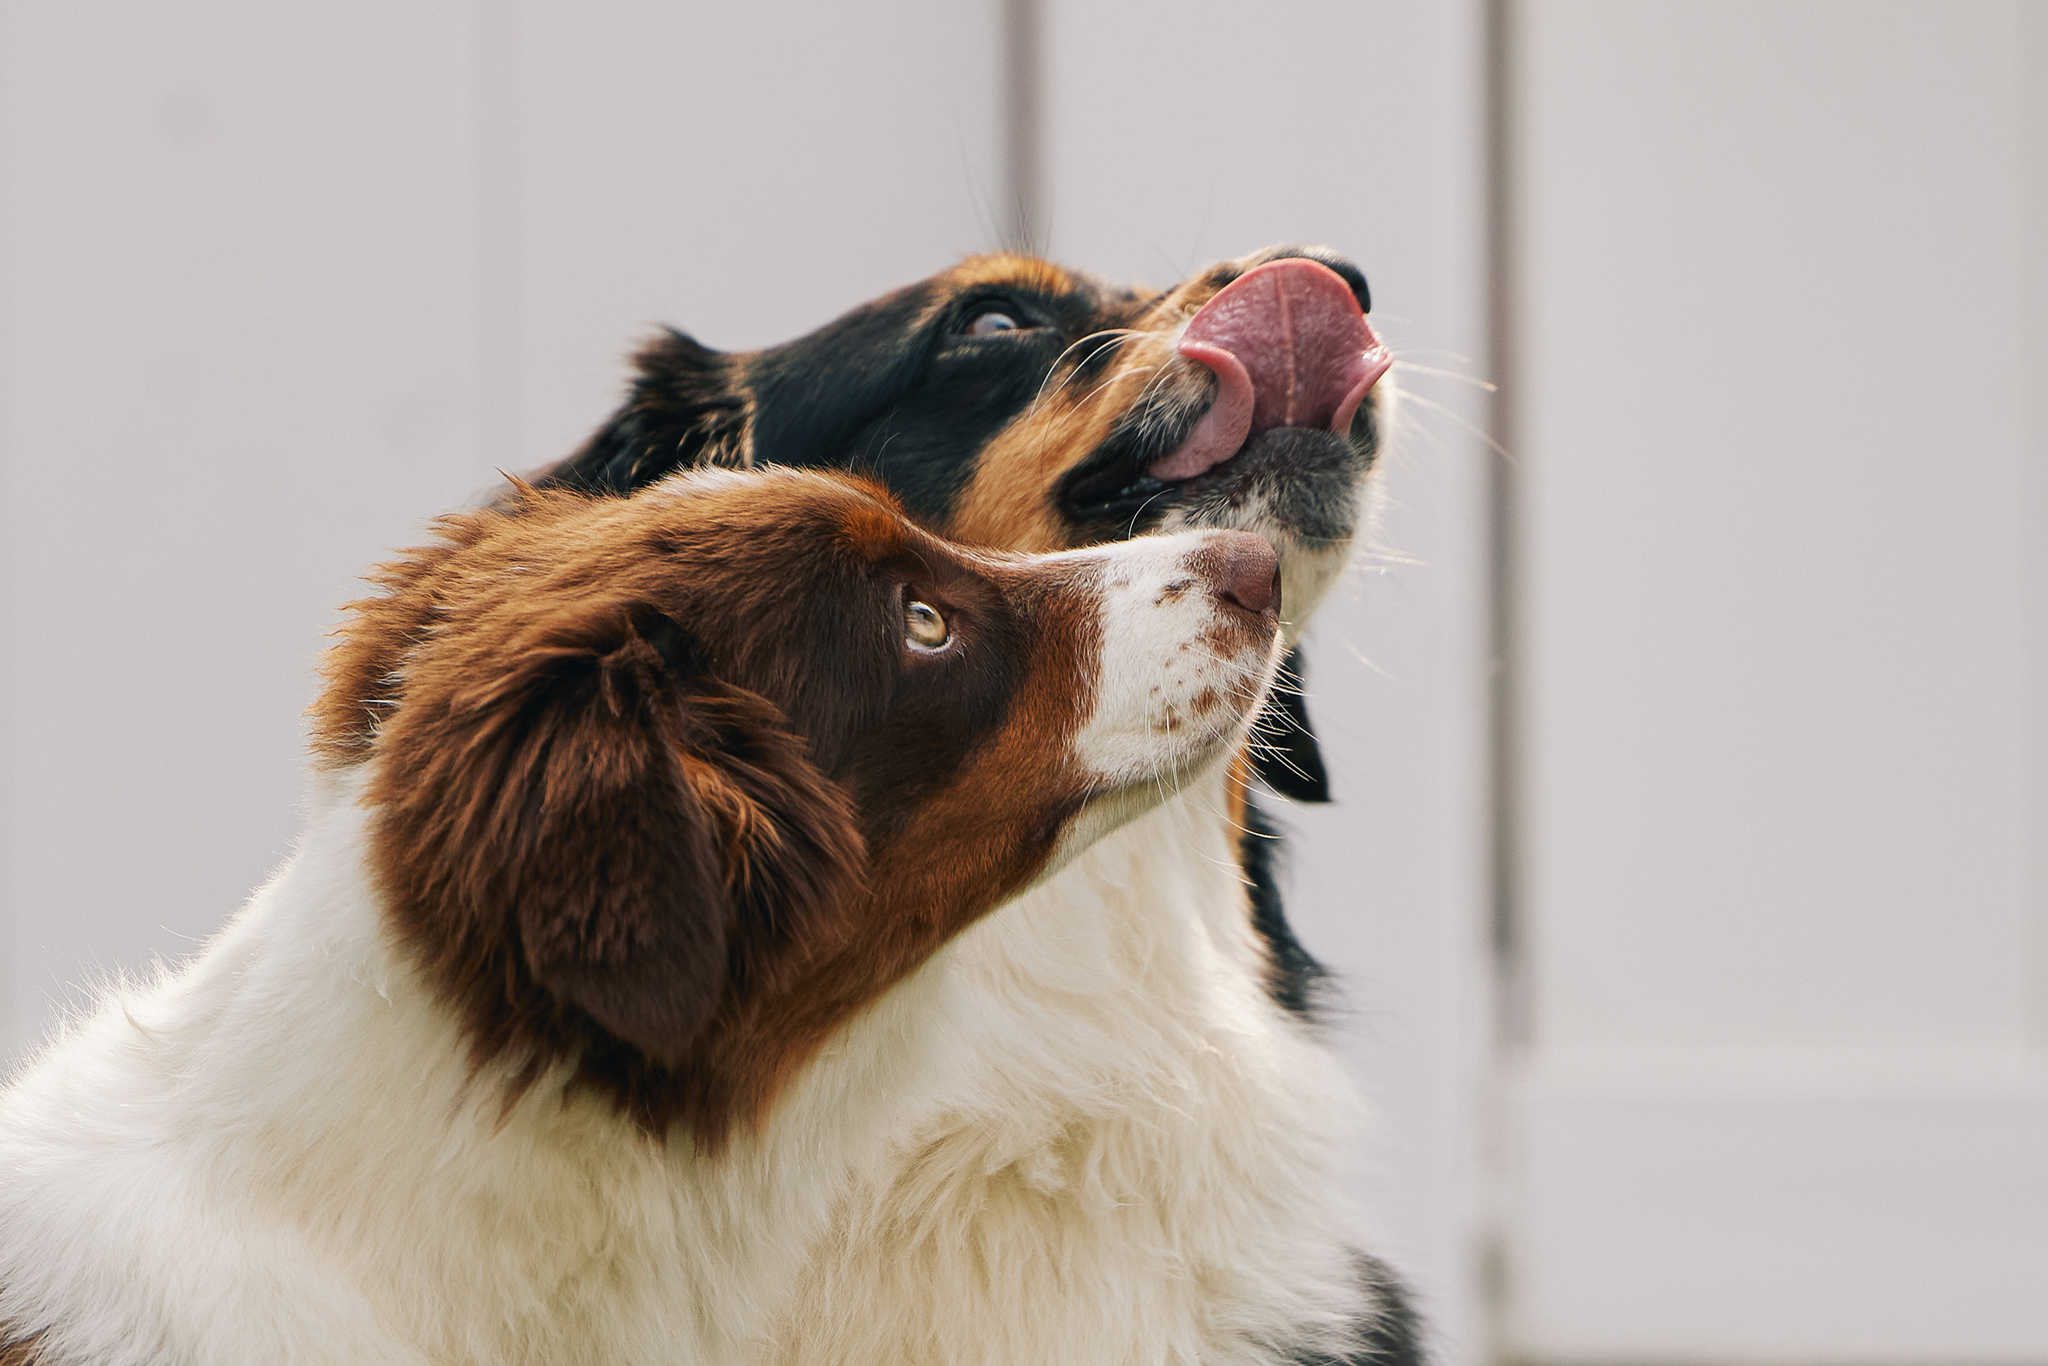 Two dogs eagerly look up towards an unknown delight. Image taken by LA Lifestyle Advertising Photographer Hannah Dunsirn.